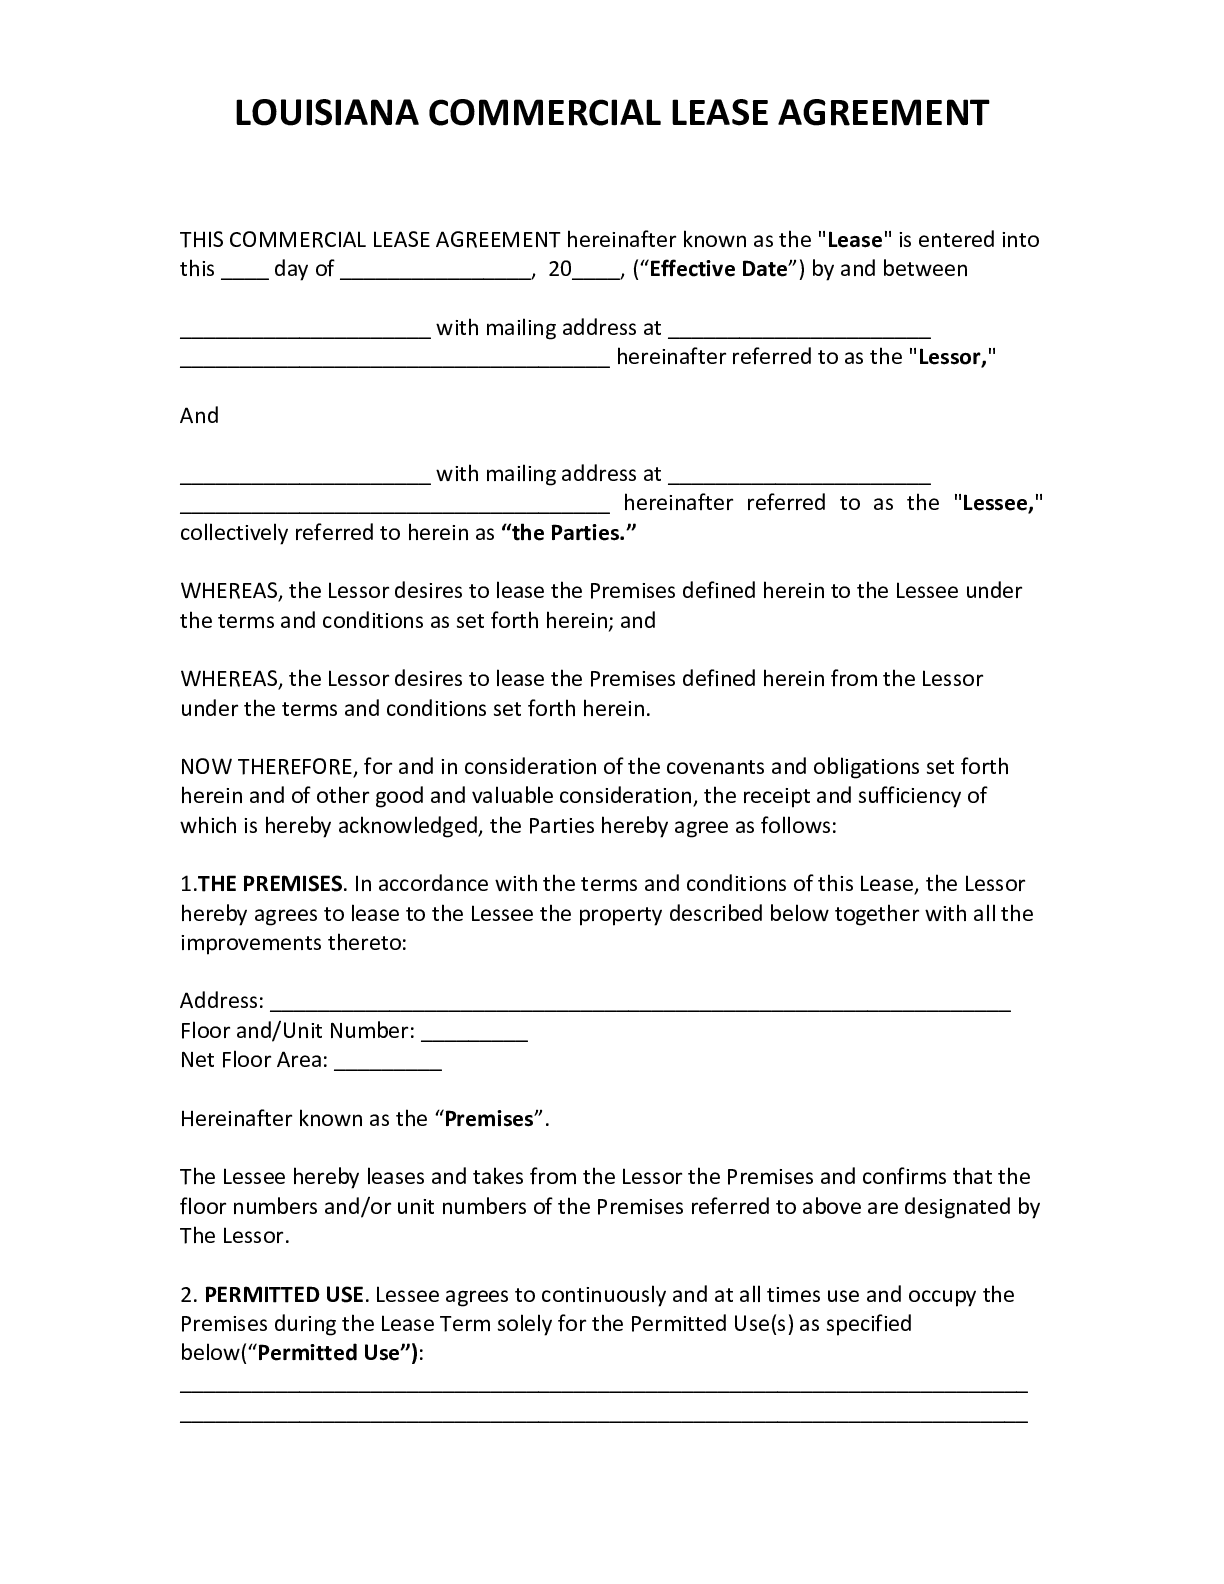 OFFICIAL Louisiana Commercial Lease Agreement [2020] PDF Form